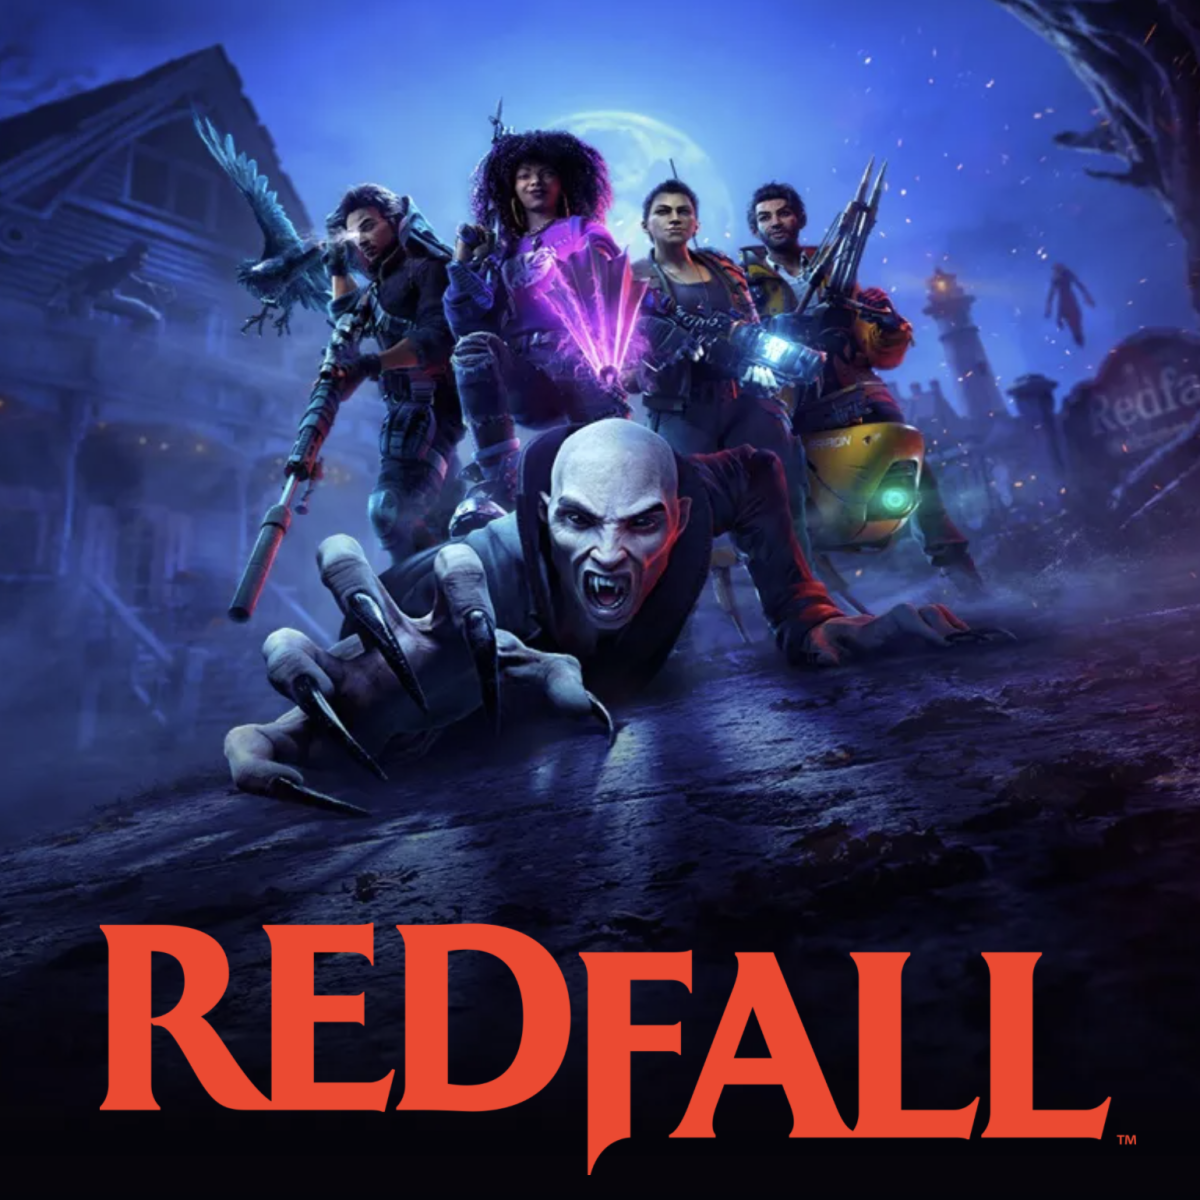 Redfall stalks the night in May 2023